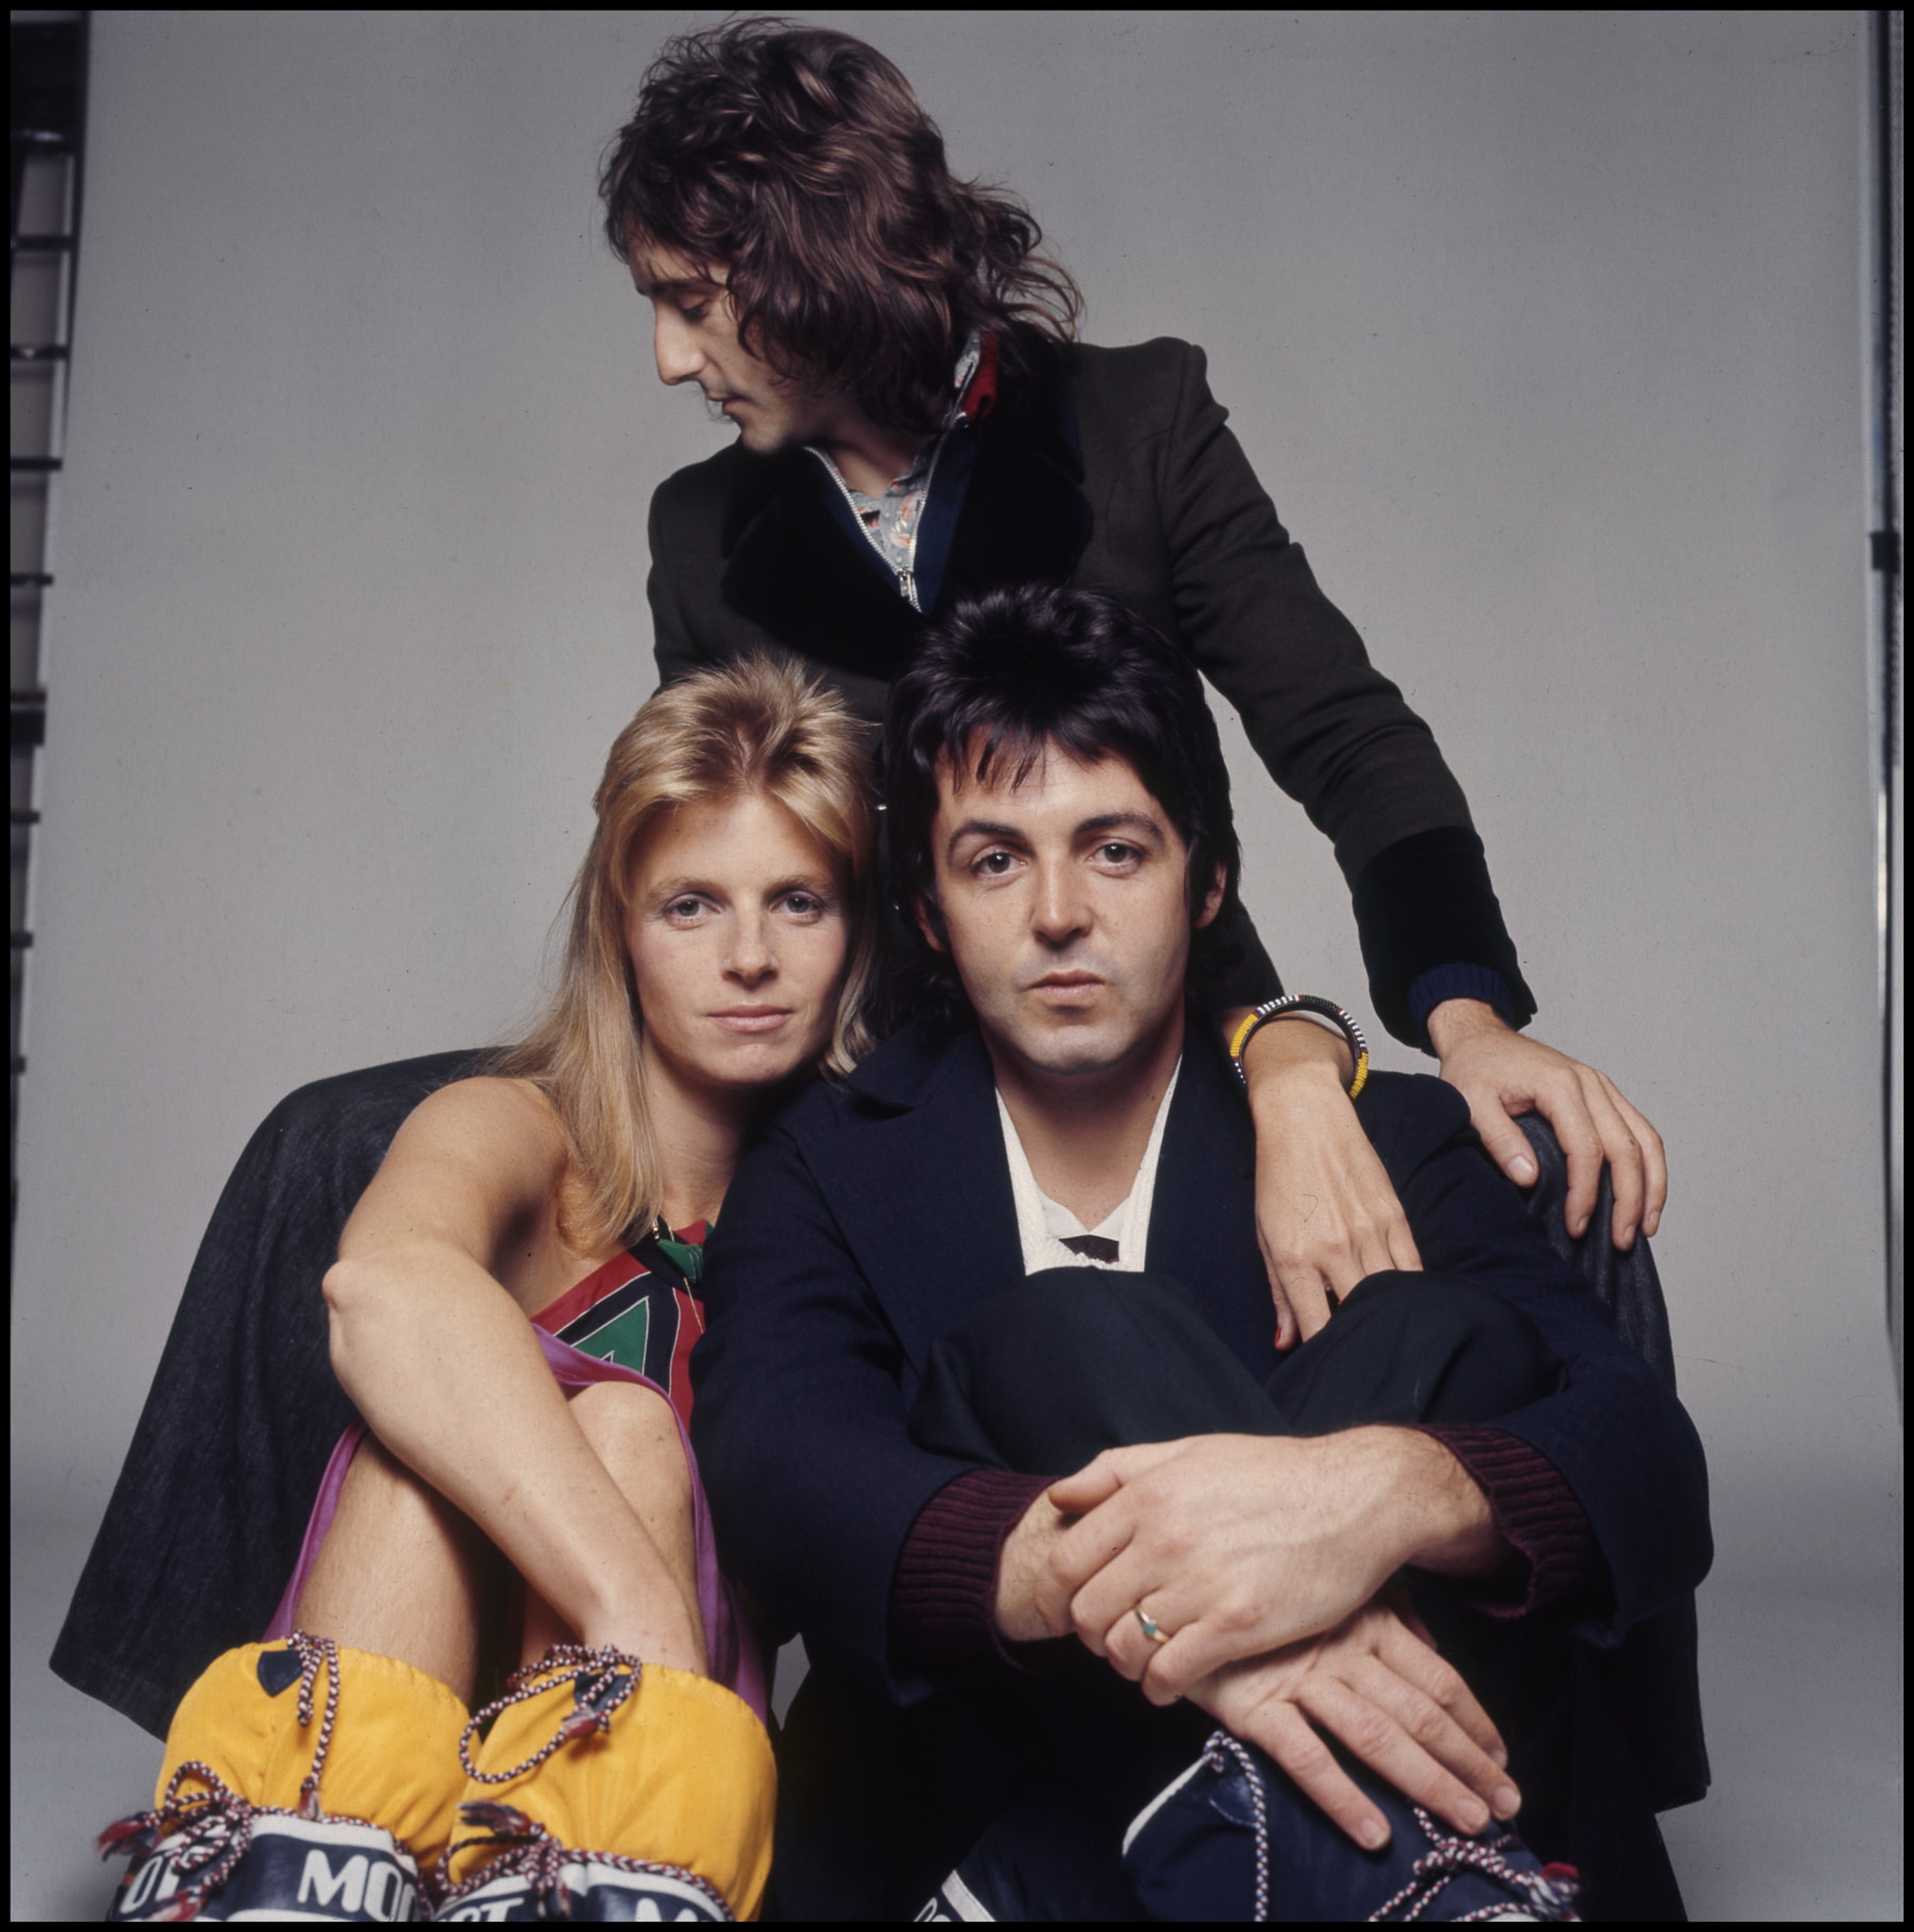 Photograph of Denny Laine, Paul and Linda McCartney used to promote the 50th anniversary of 'Band on the Run'